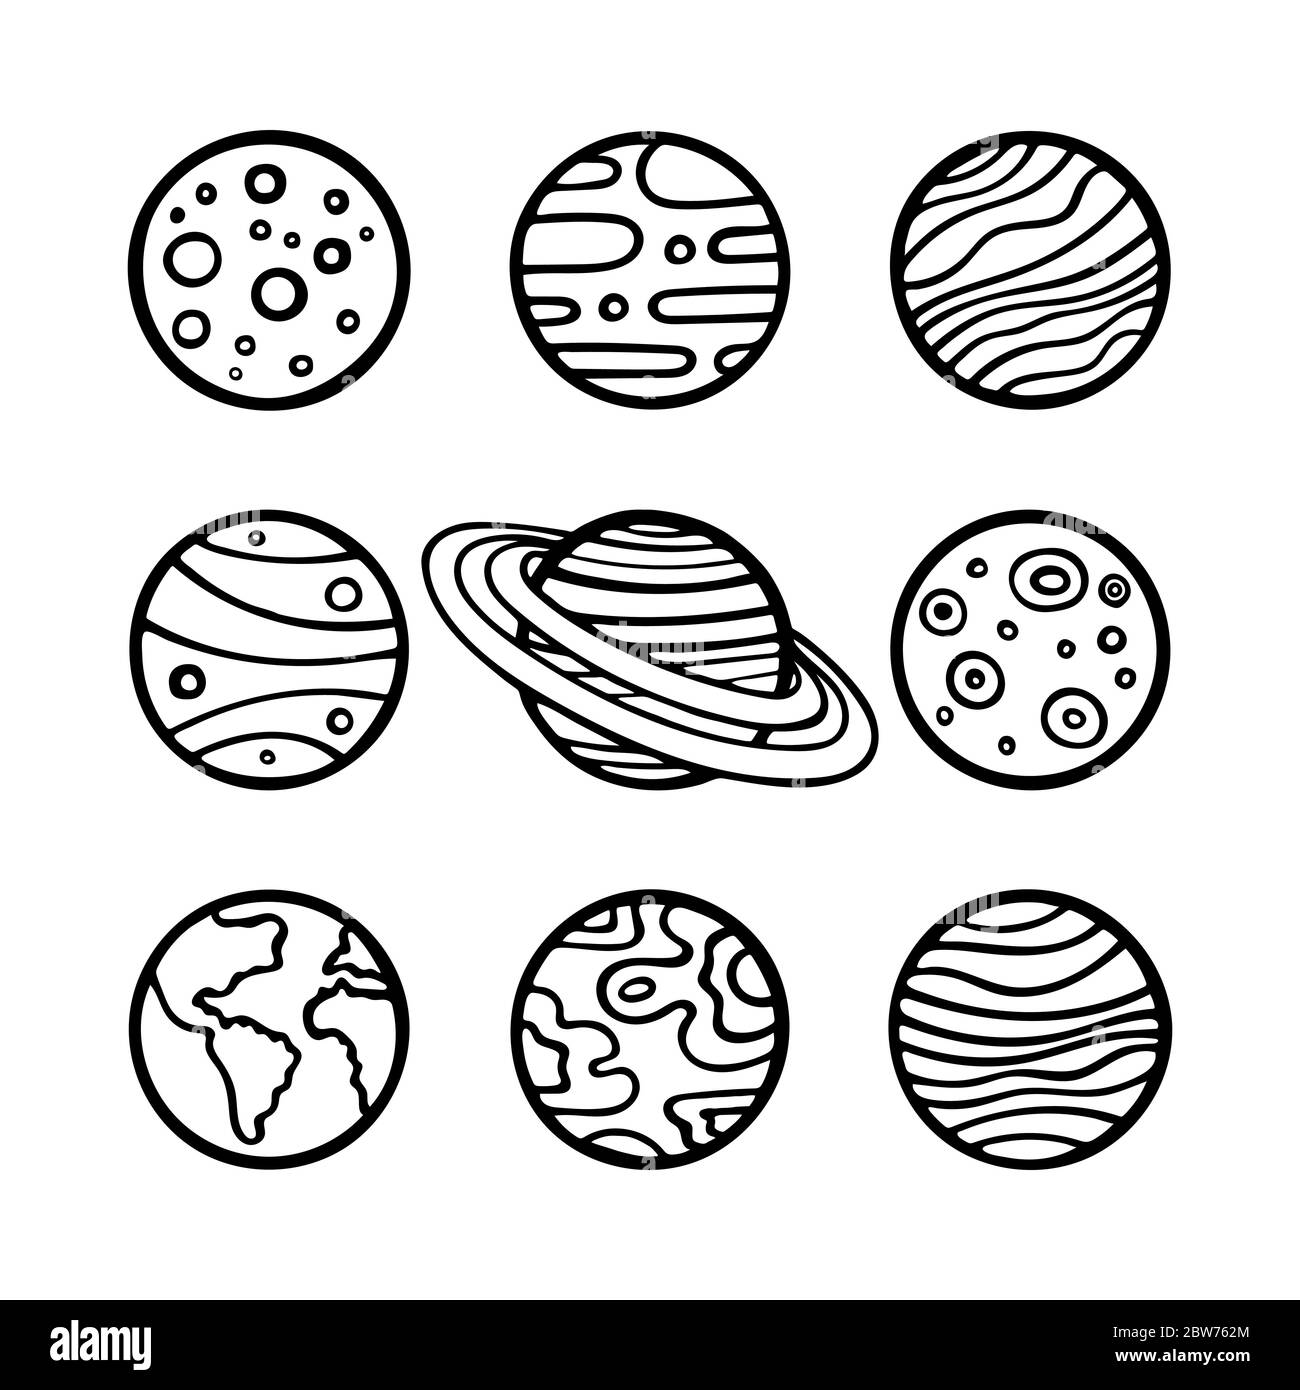 Planets and stars. Hand drawn planets and different shape stars vector illustration set. Planets sketch drawing. Doodle planets and stars. Part of set Stock Vector